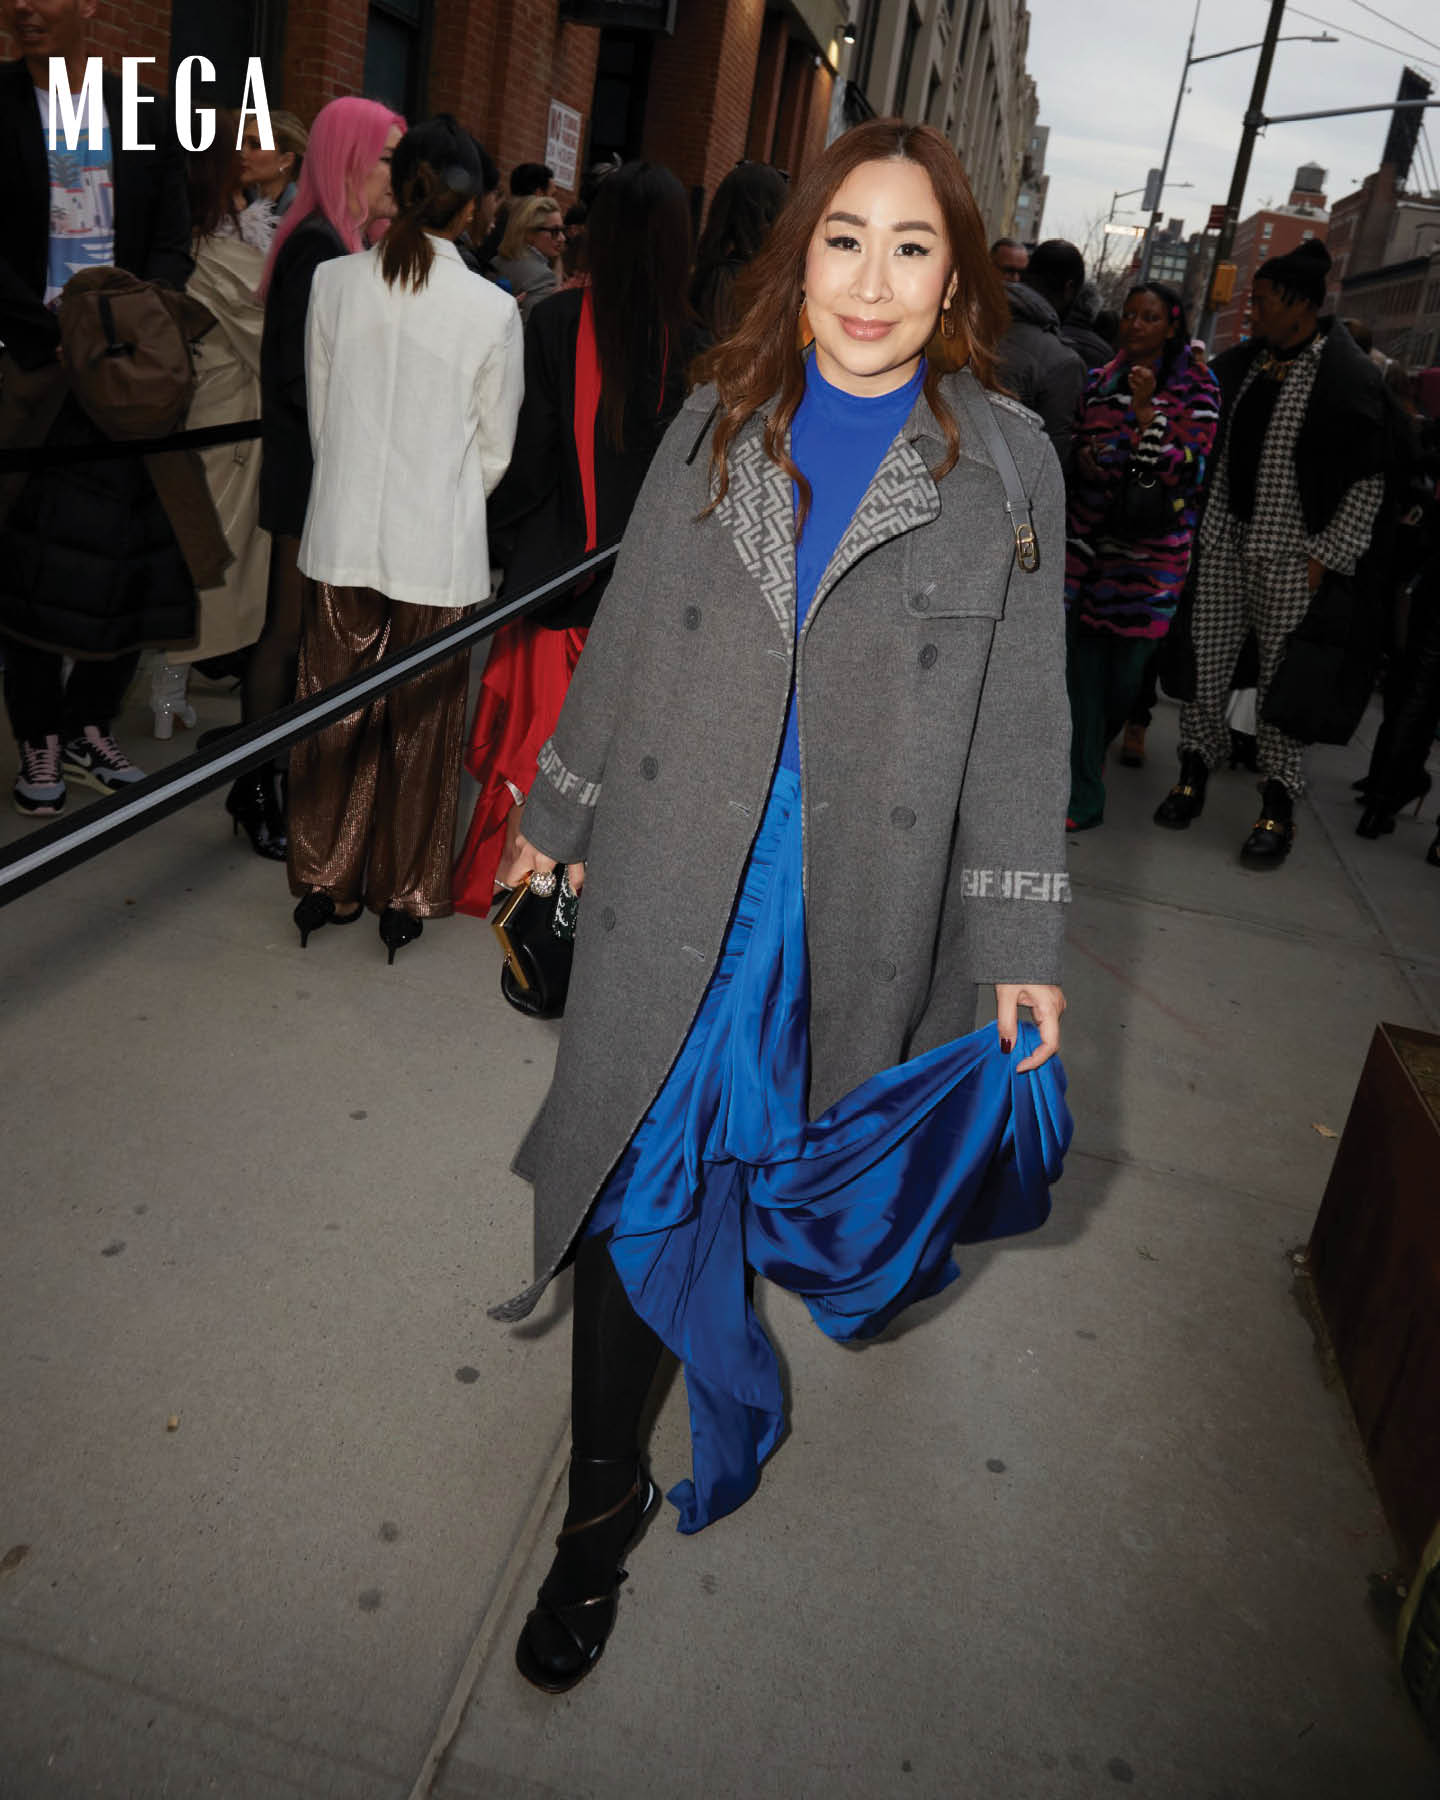 The MEGA Beauty Director stuns in an electric blue dress by MARTIN BAUTISTA and a grey coat by FENDI